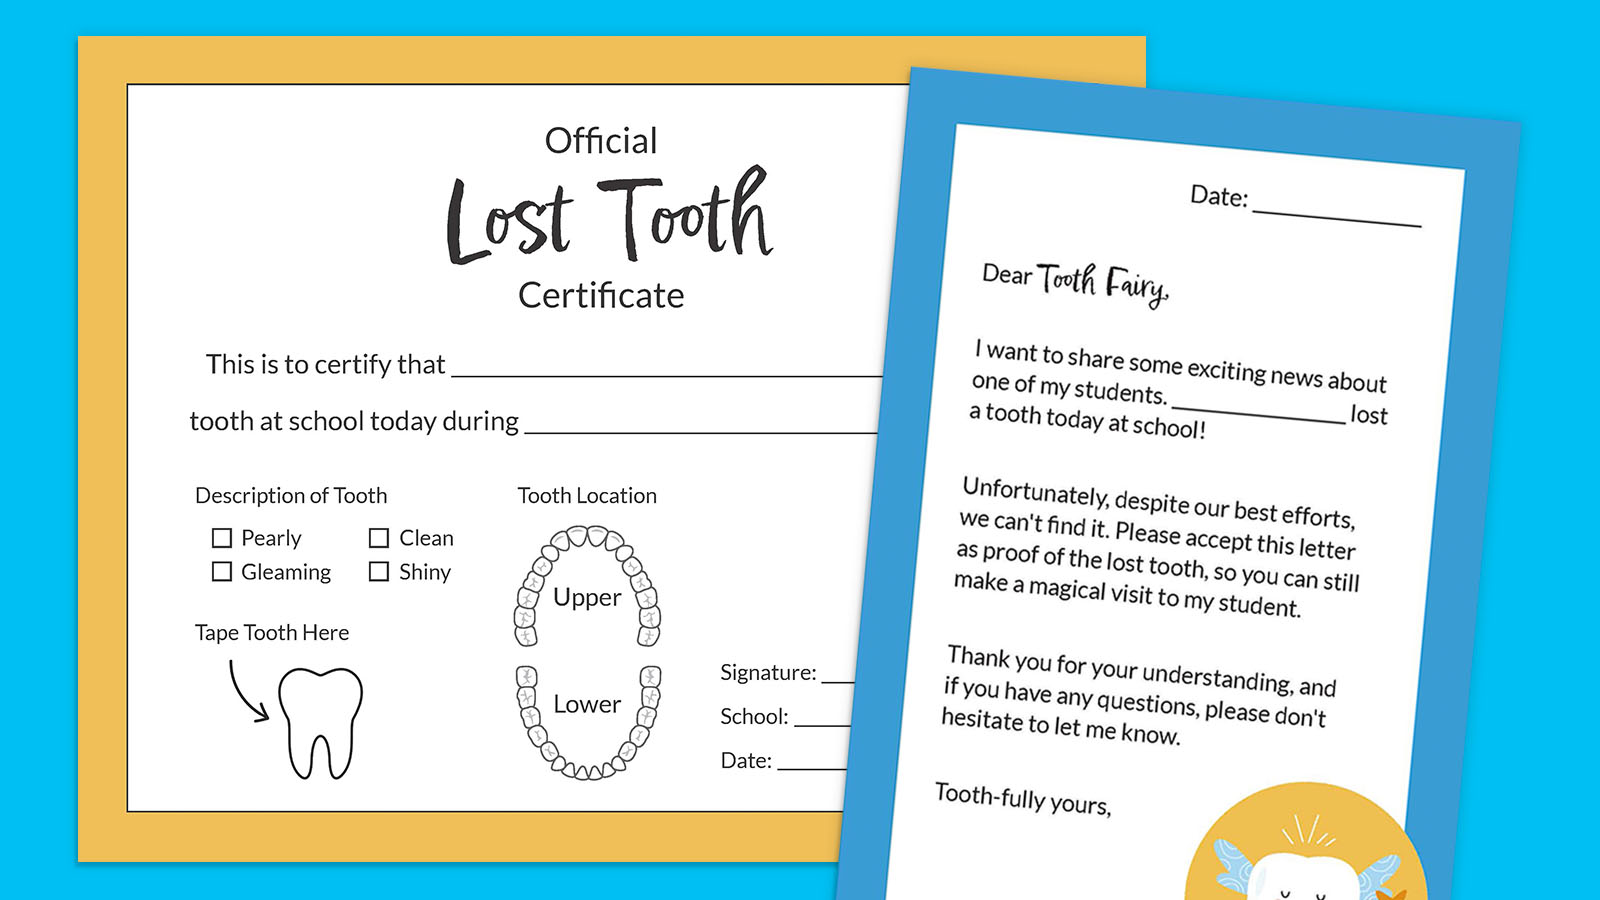 Tooth Fairy letter and lost tooth certificate from school.